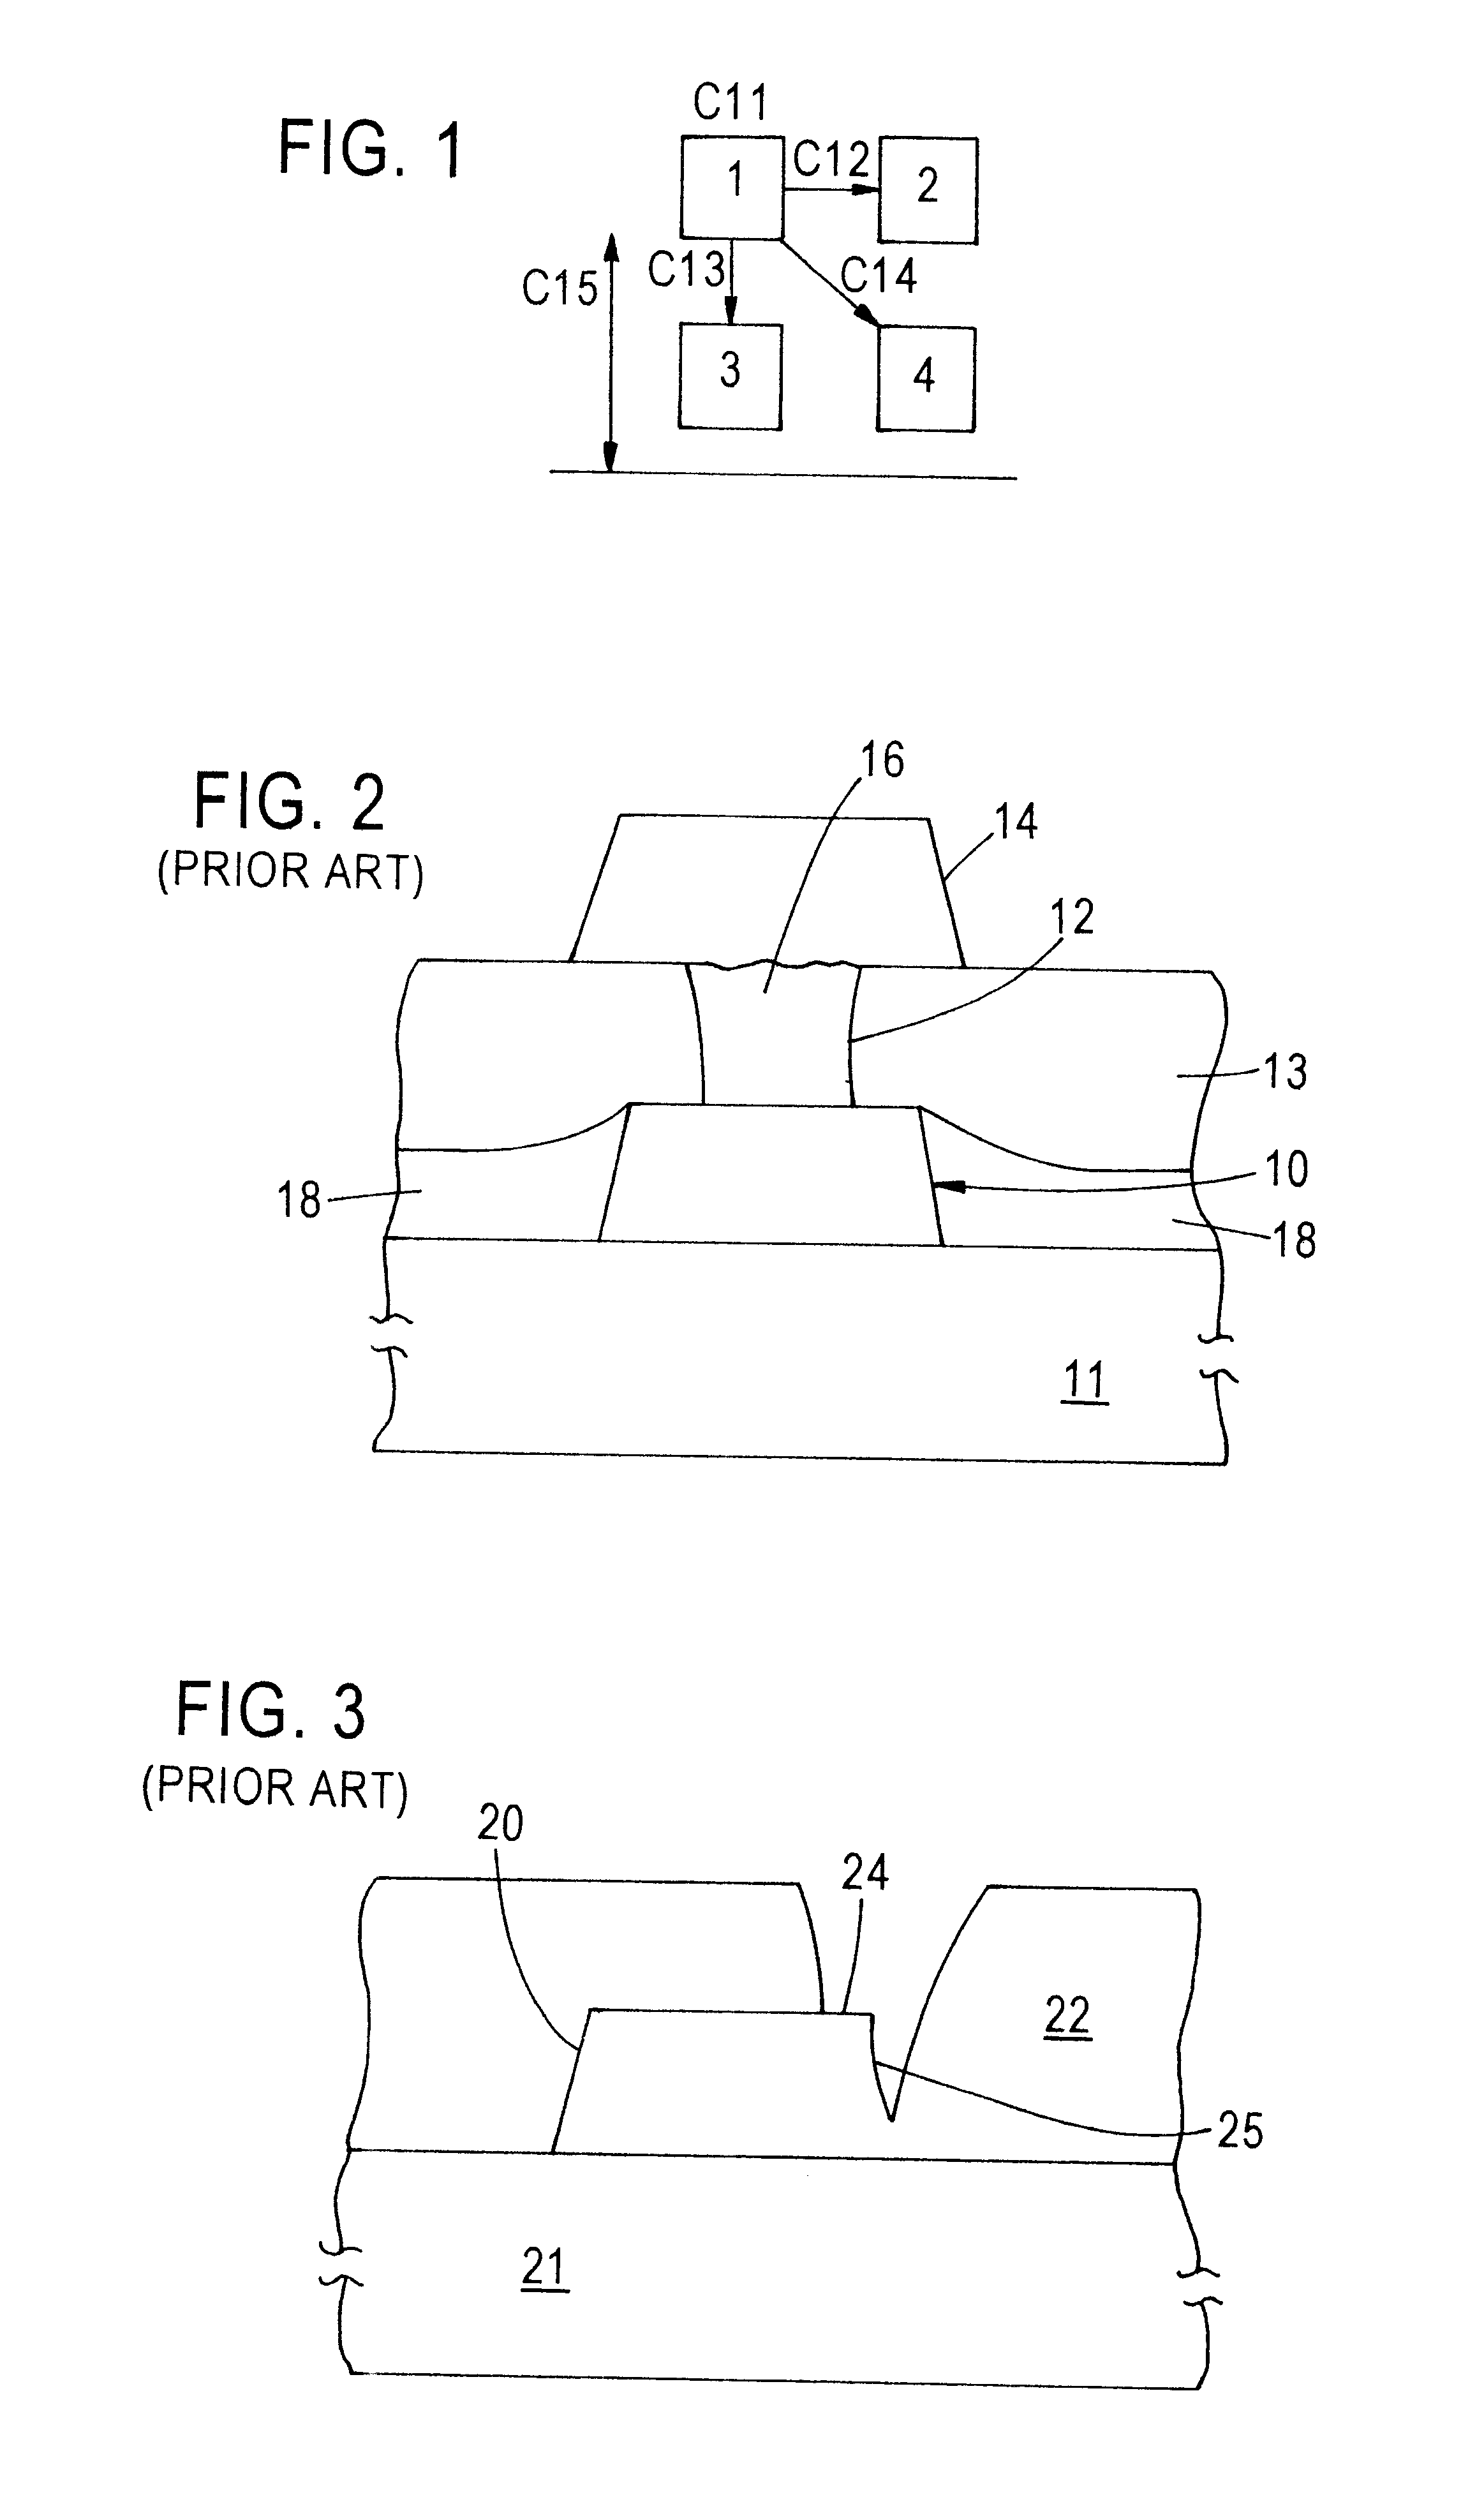 Reverse mask and nitride layer deposition for reduction of vertical capacitance variation in multi-layer metallization systems